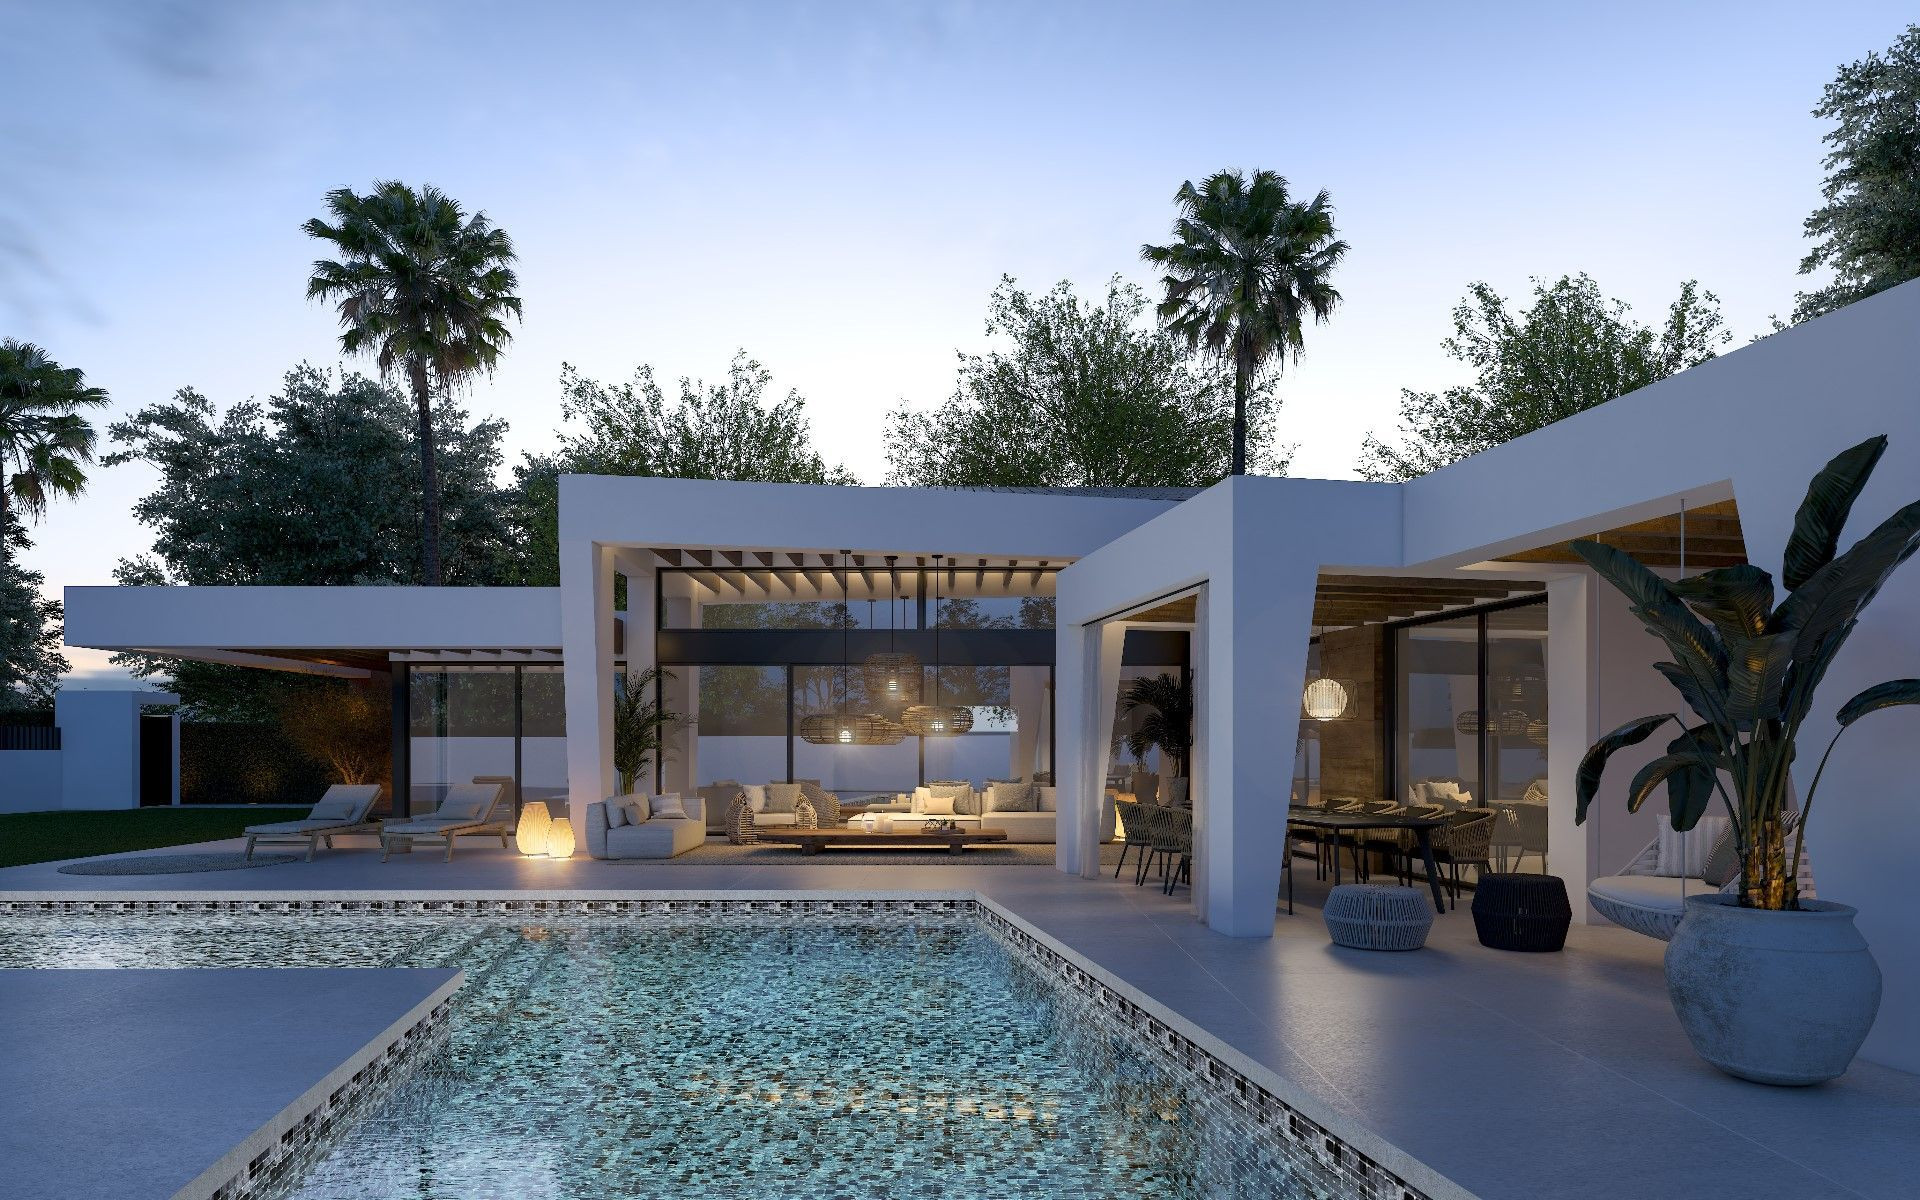 Exclusive project of 3 contemporary-style luxury villas on one floor in the heart of the Golf Valley.